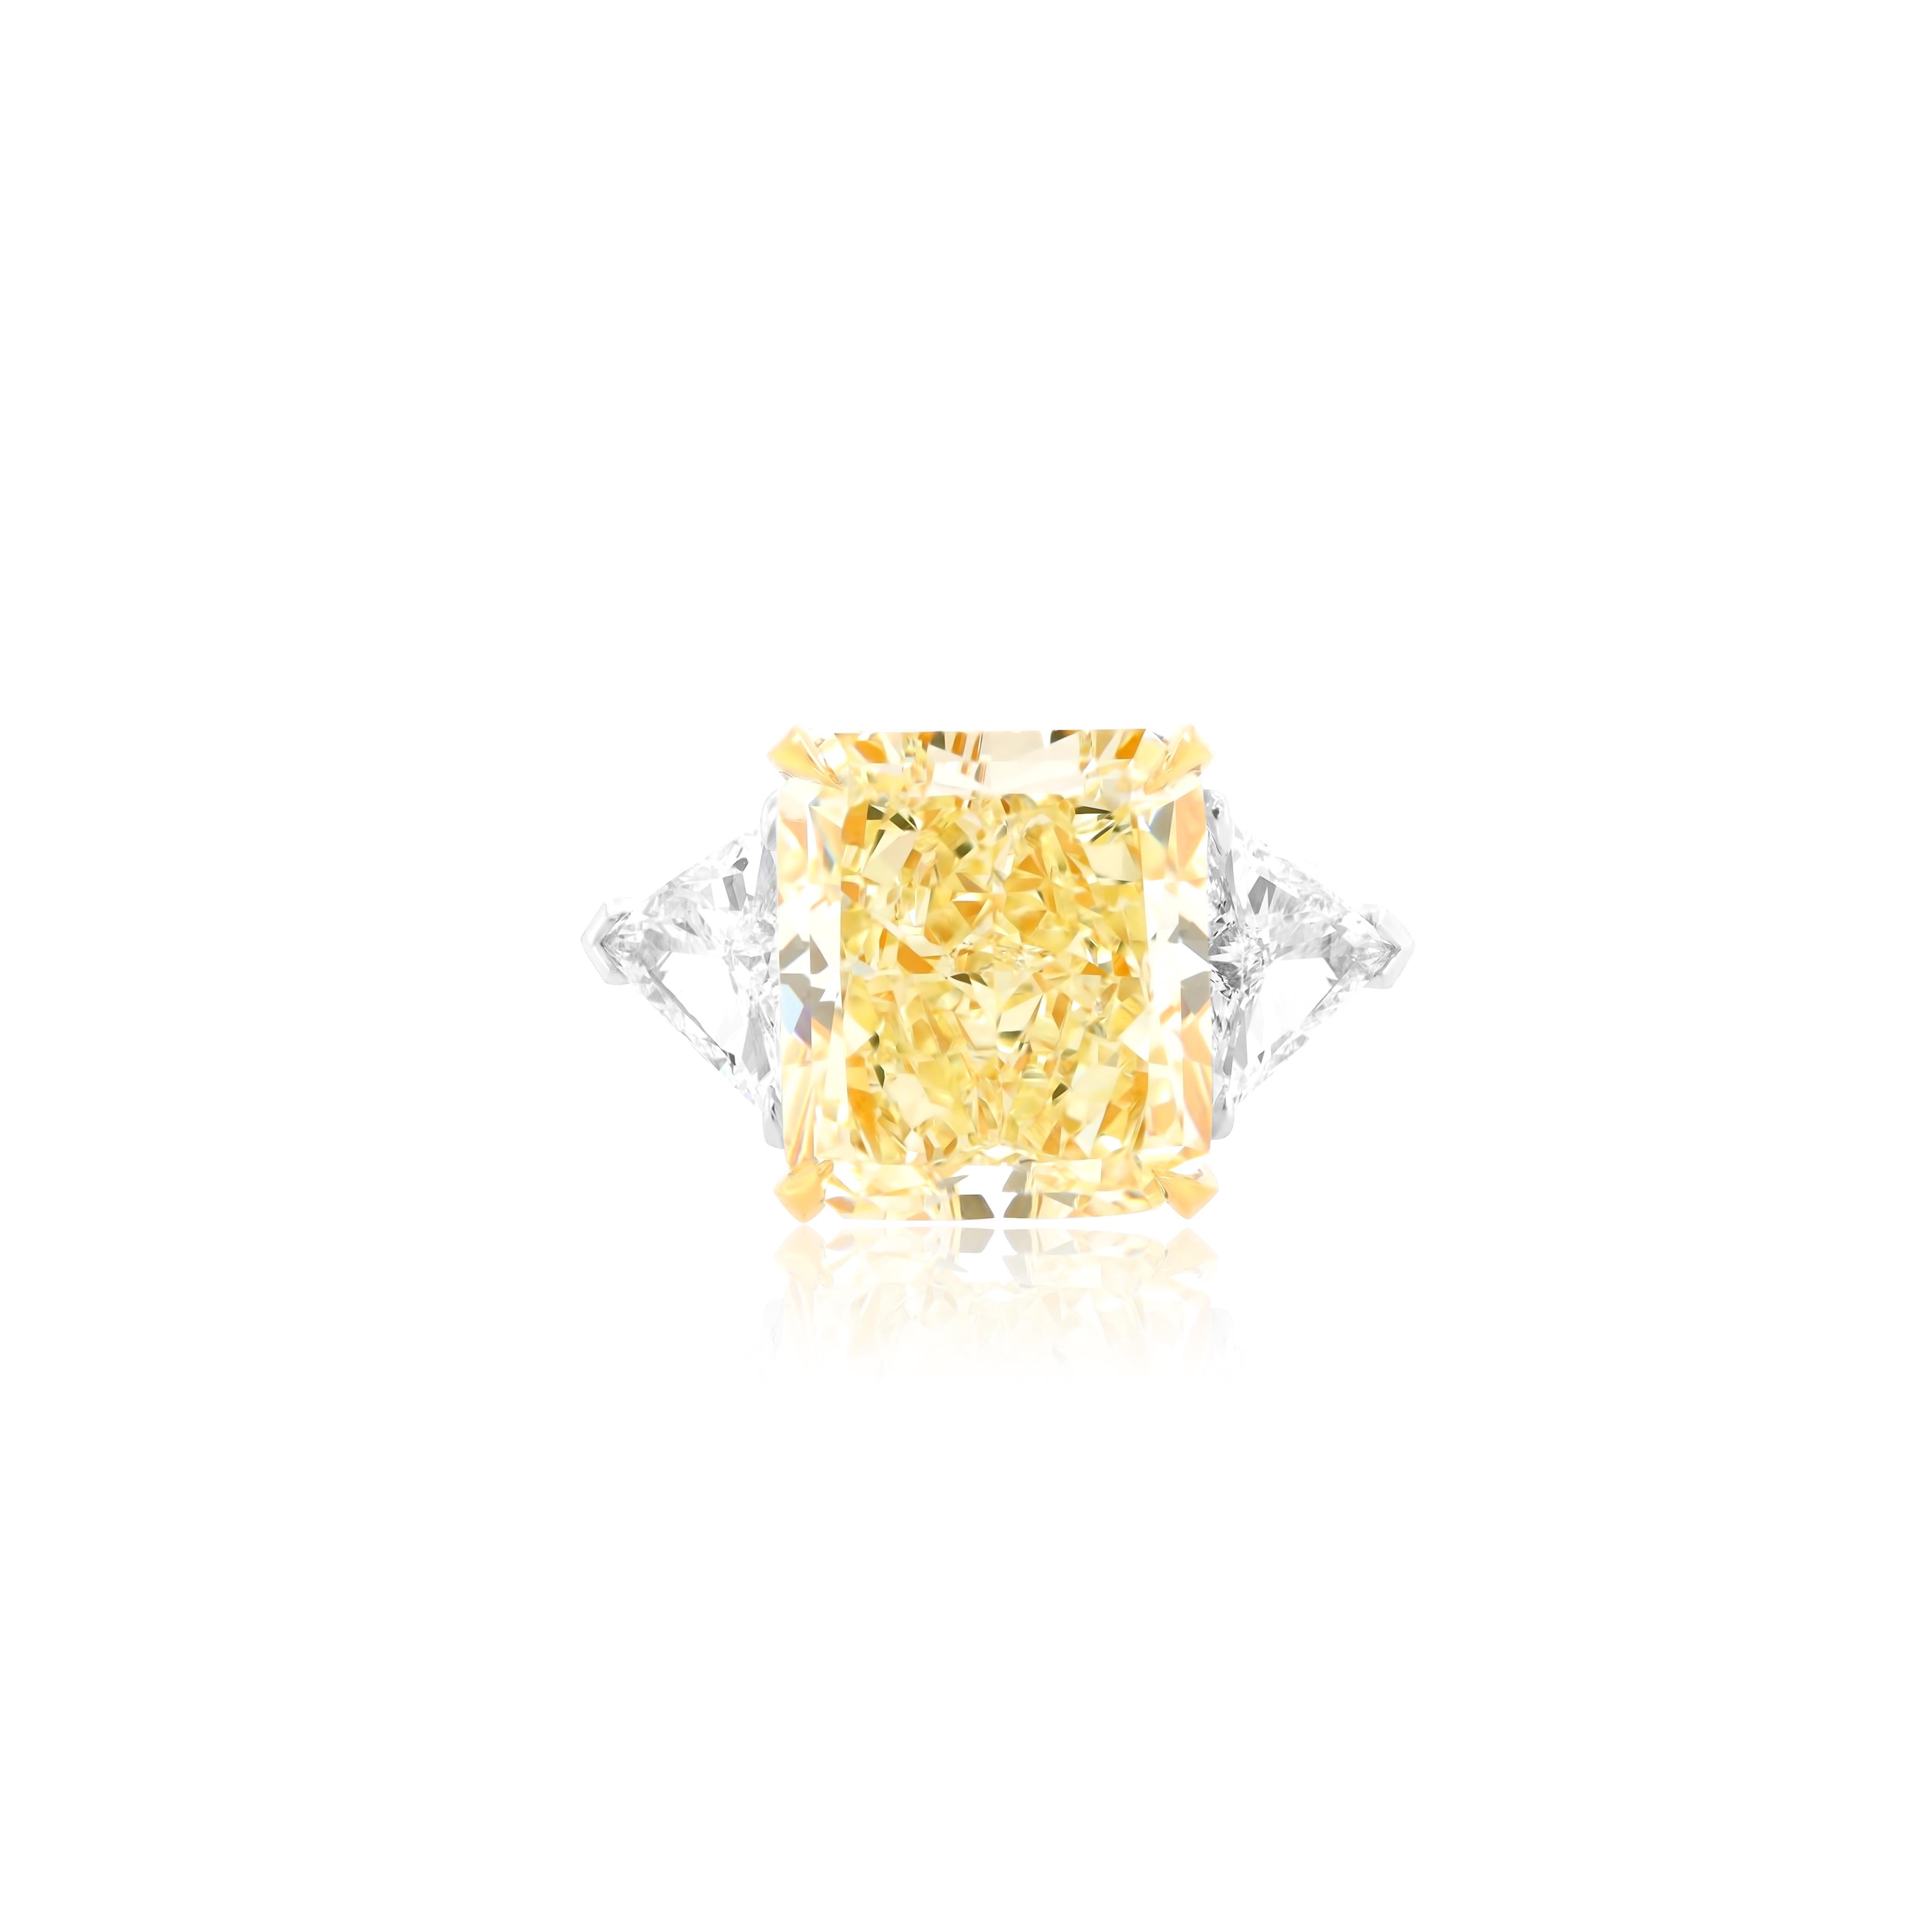 Magnificent Platinum and 18kt Yellow gold fancy yellow diamond engagement ring with center GIA certified 14.89 Carats Fancy Yellow VVS2 radiant cut diamond set with two triangular, features 1.92 carats

